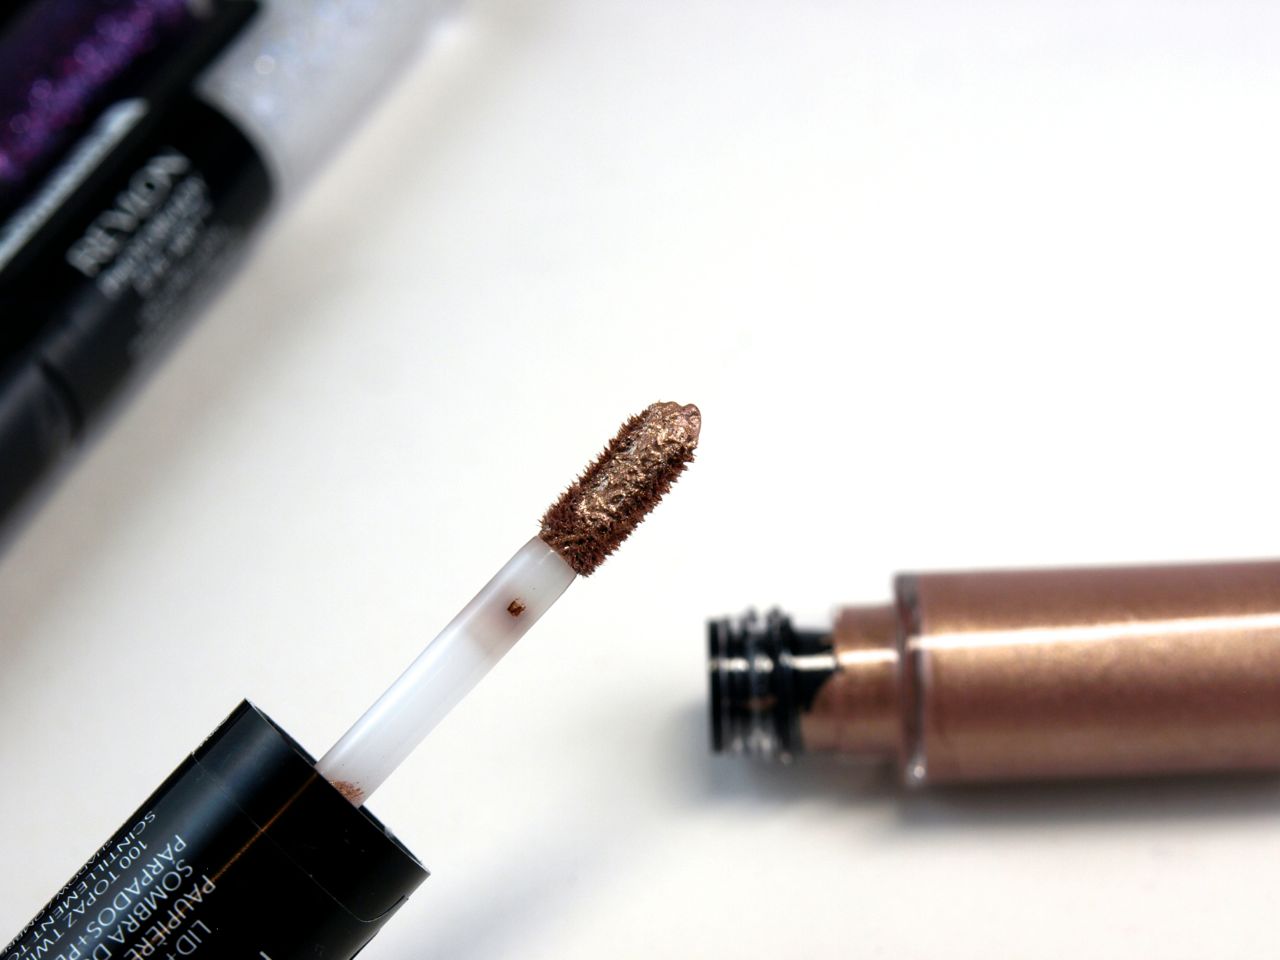 Revlon Photoready Eye Art Lid + Line + Lash: Review and Swatches